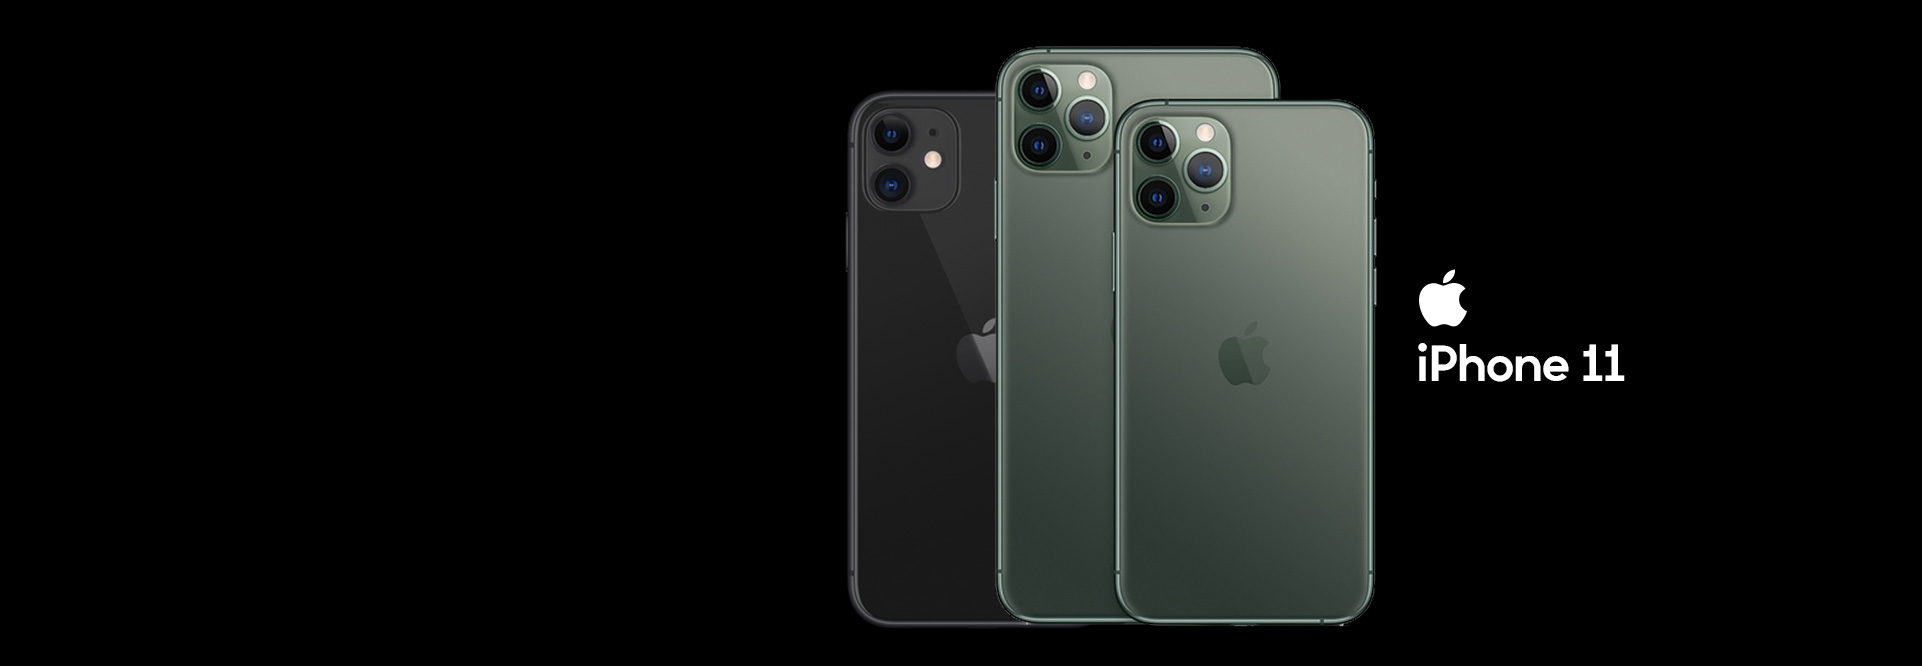 iPhone 11 Pro Max review